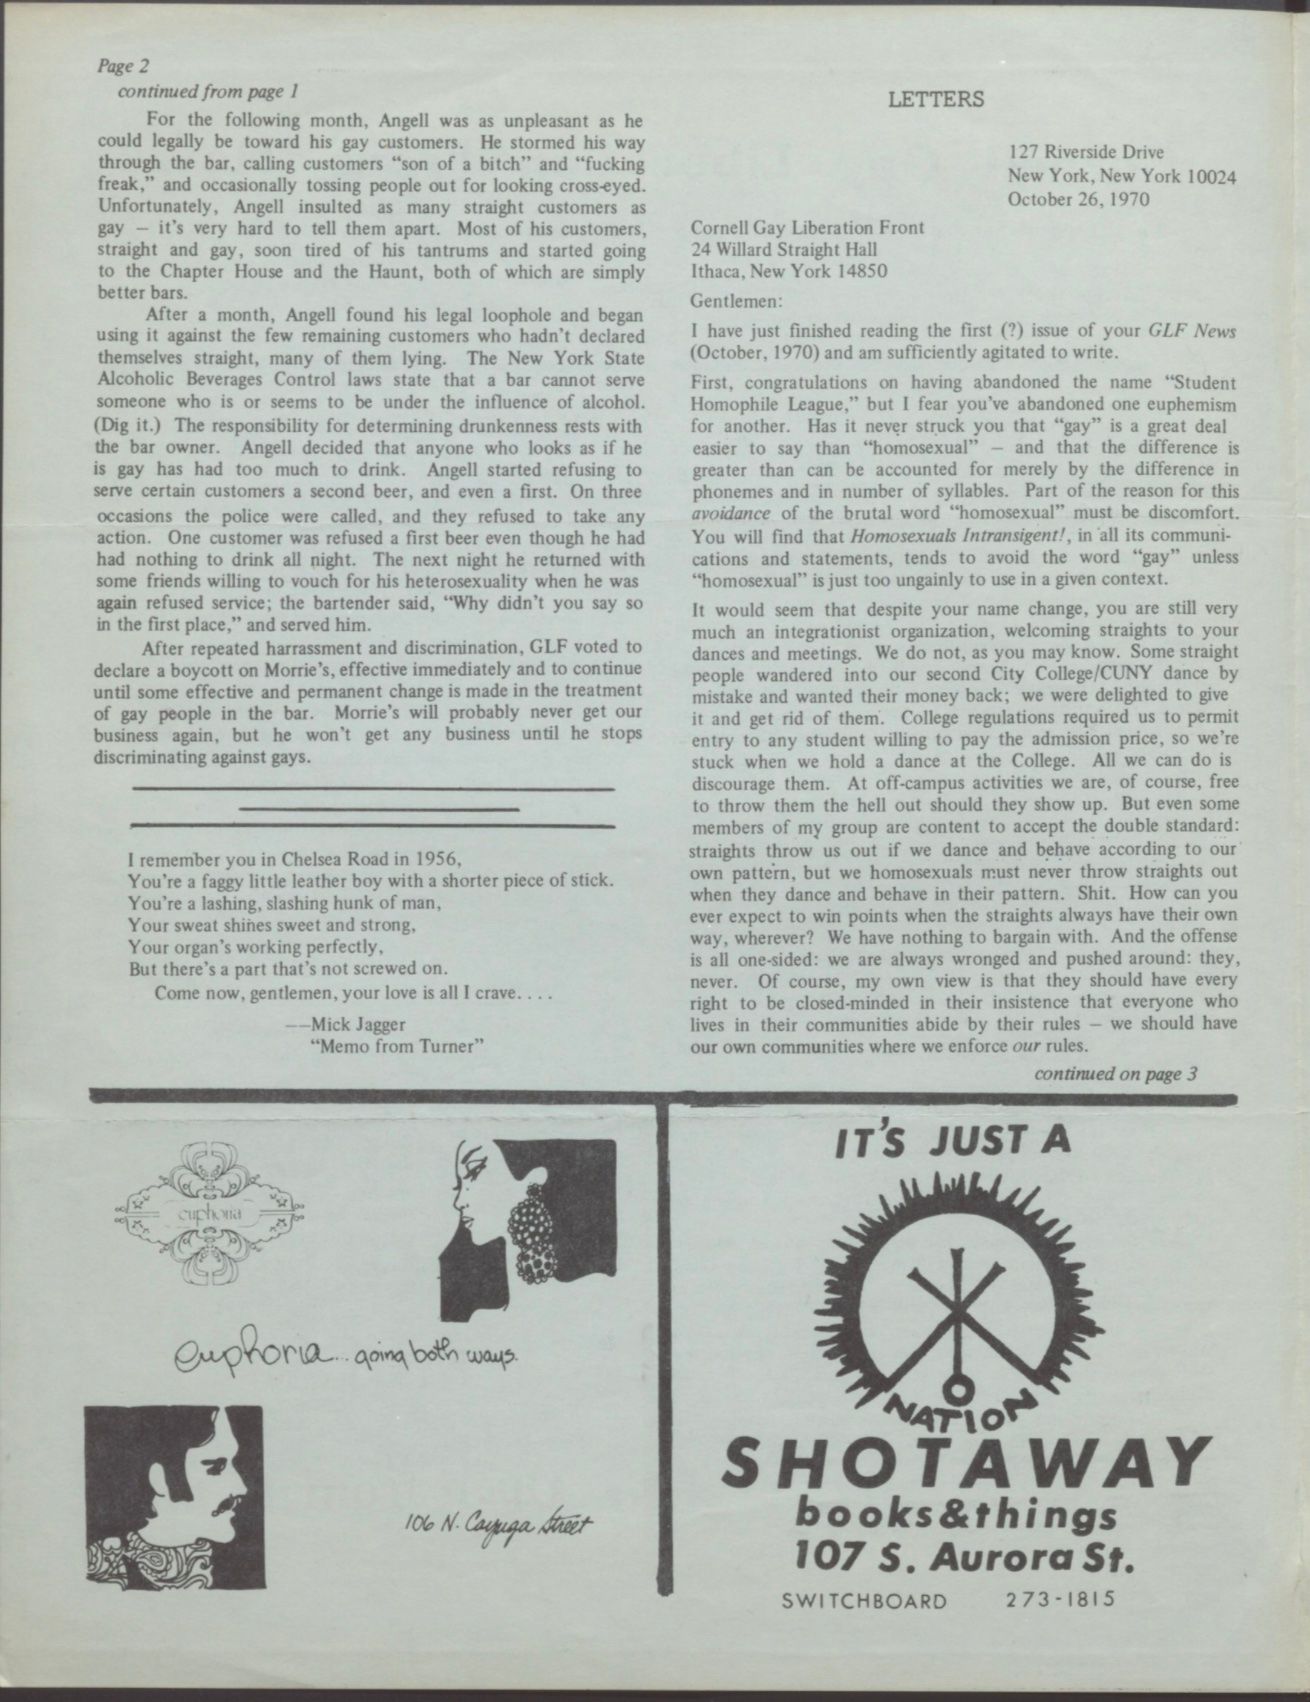 Cornell Gay Liberation Front News_November-December 1970_Page 2